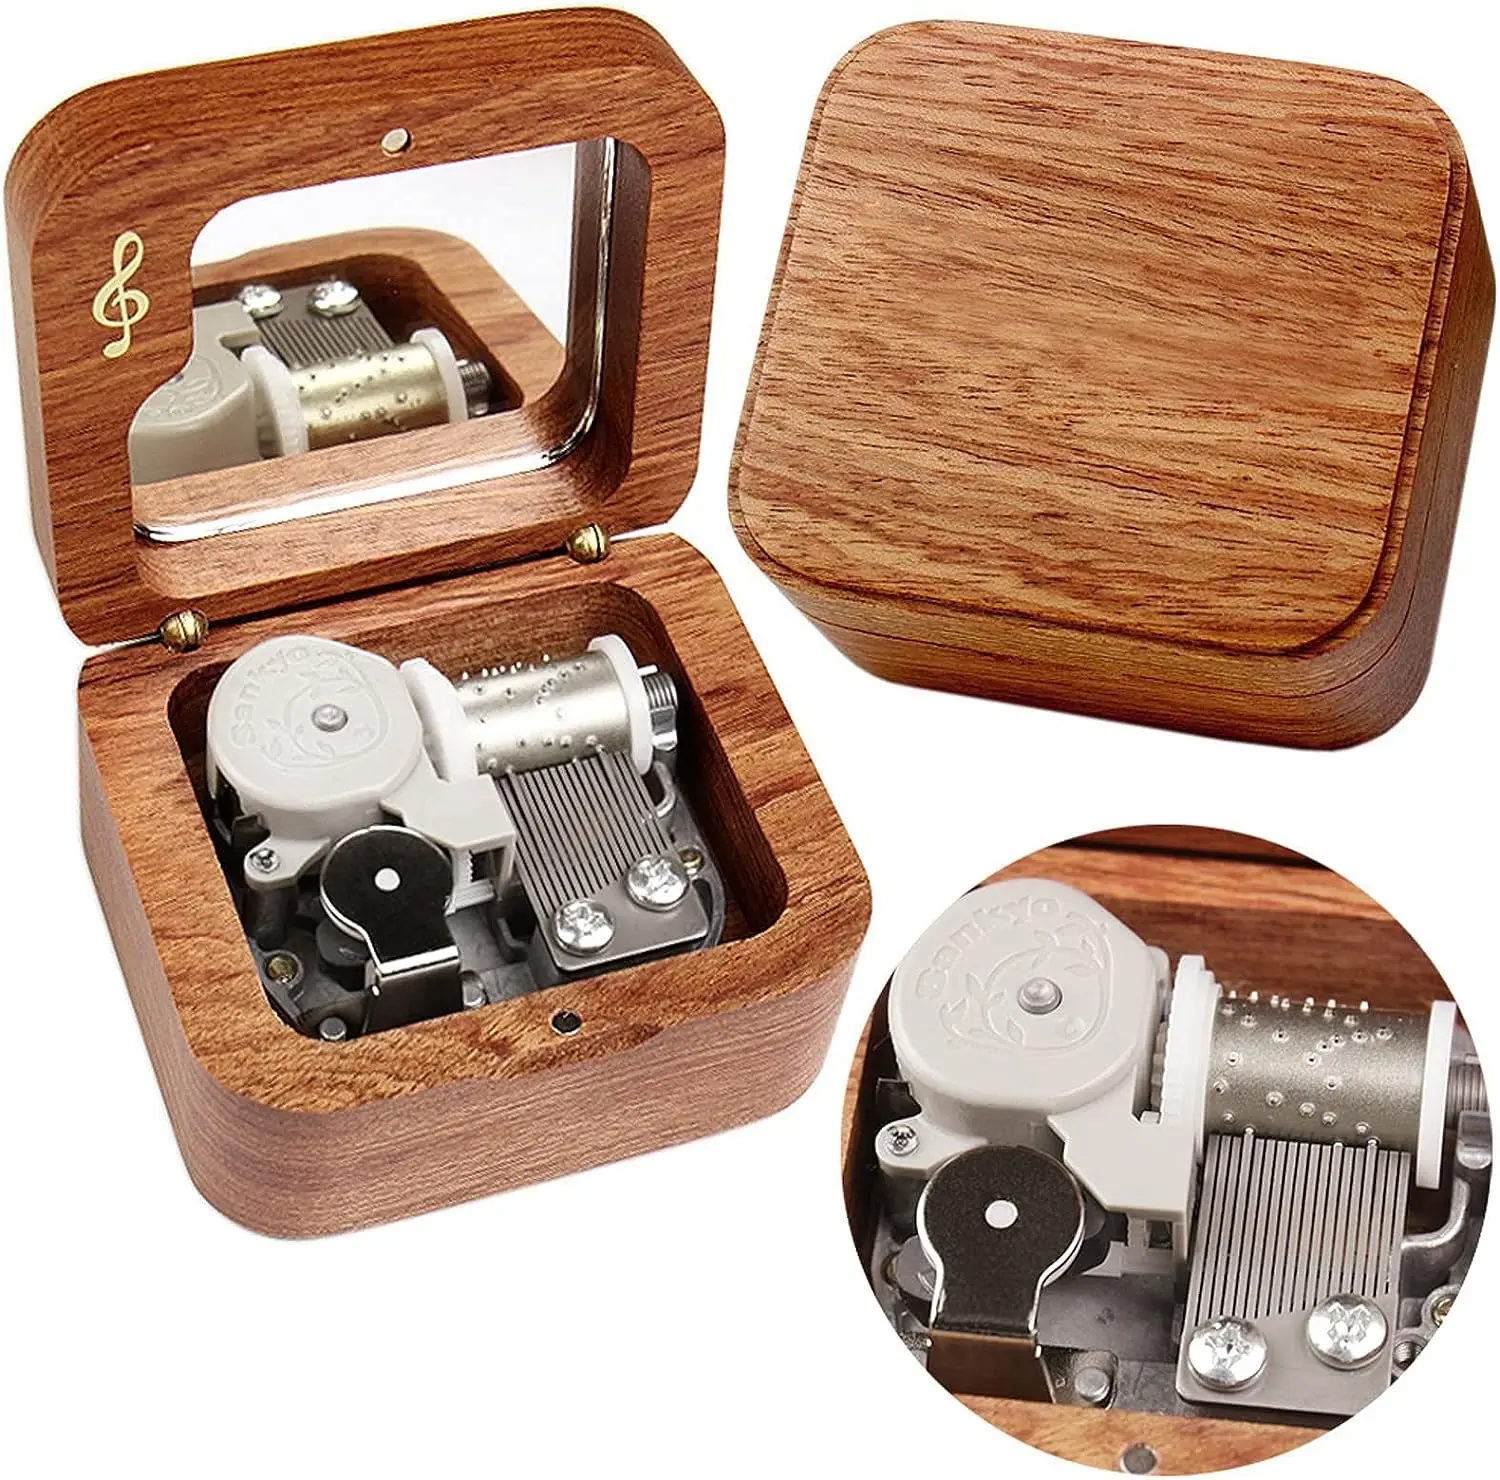 

SOFTALK Nightmares Before Christmas Solid wood walnut can pause music box Birthday, Christmas, Valentine's Day gifts